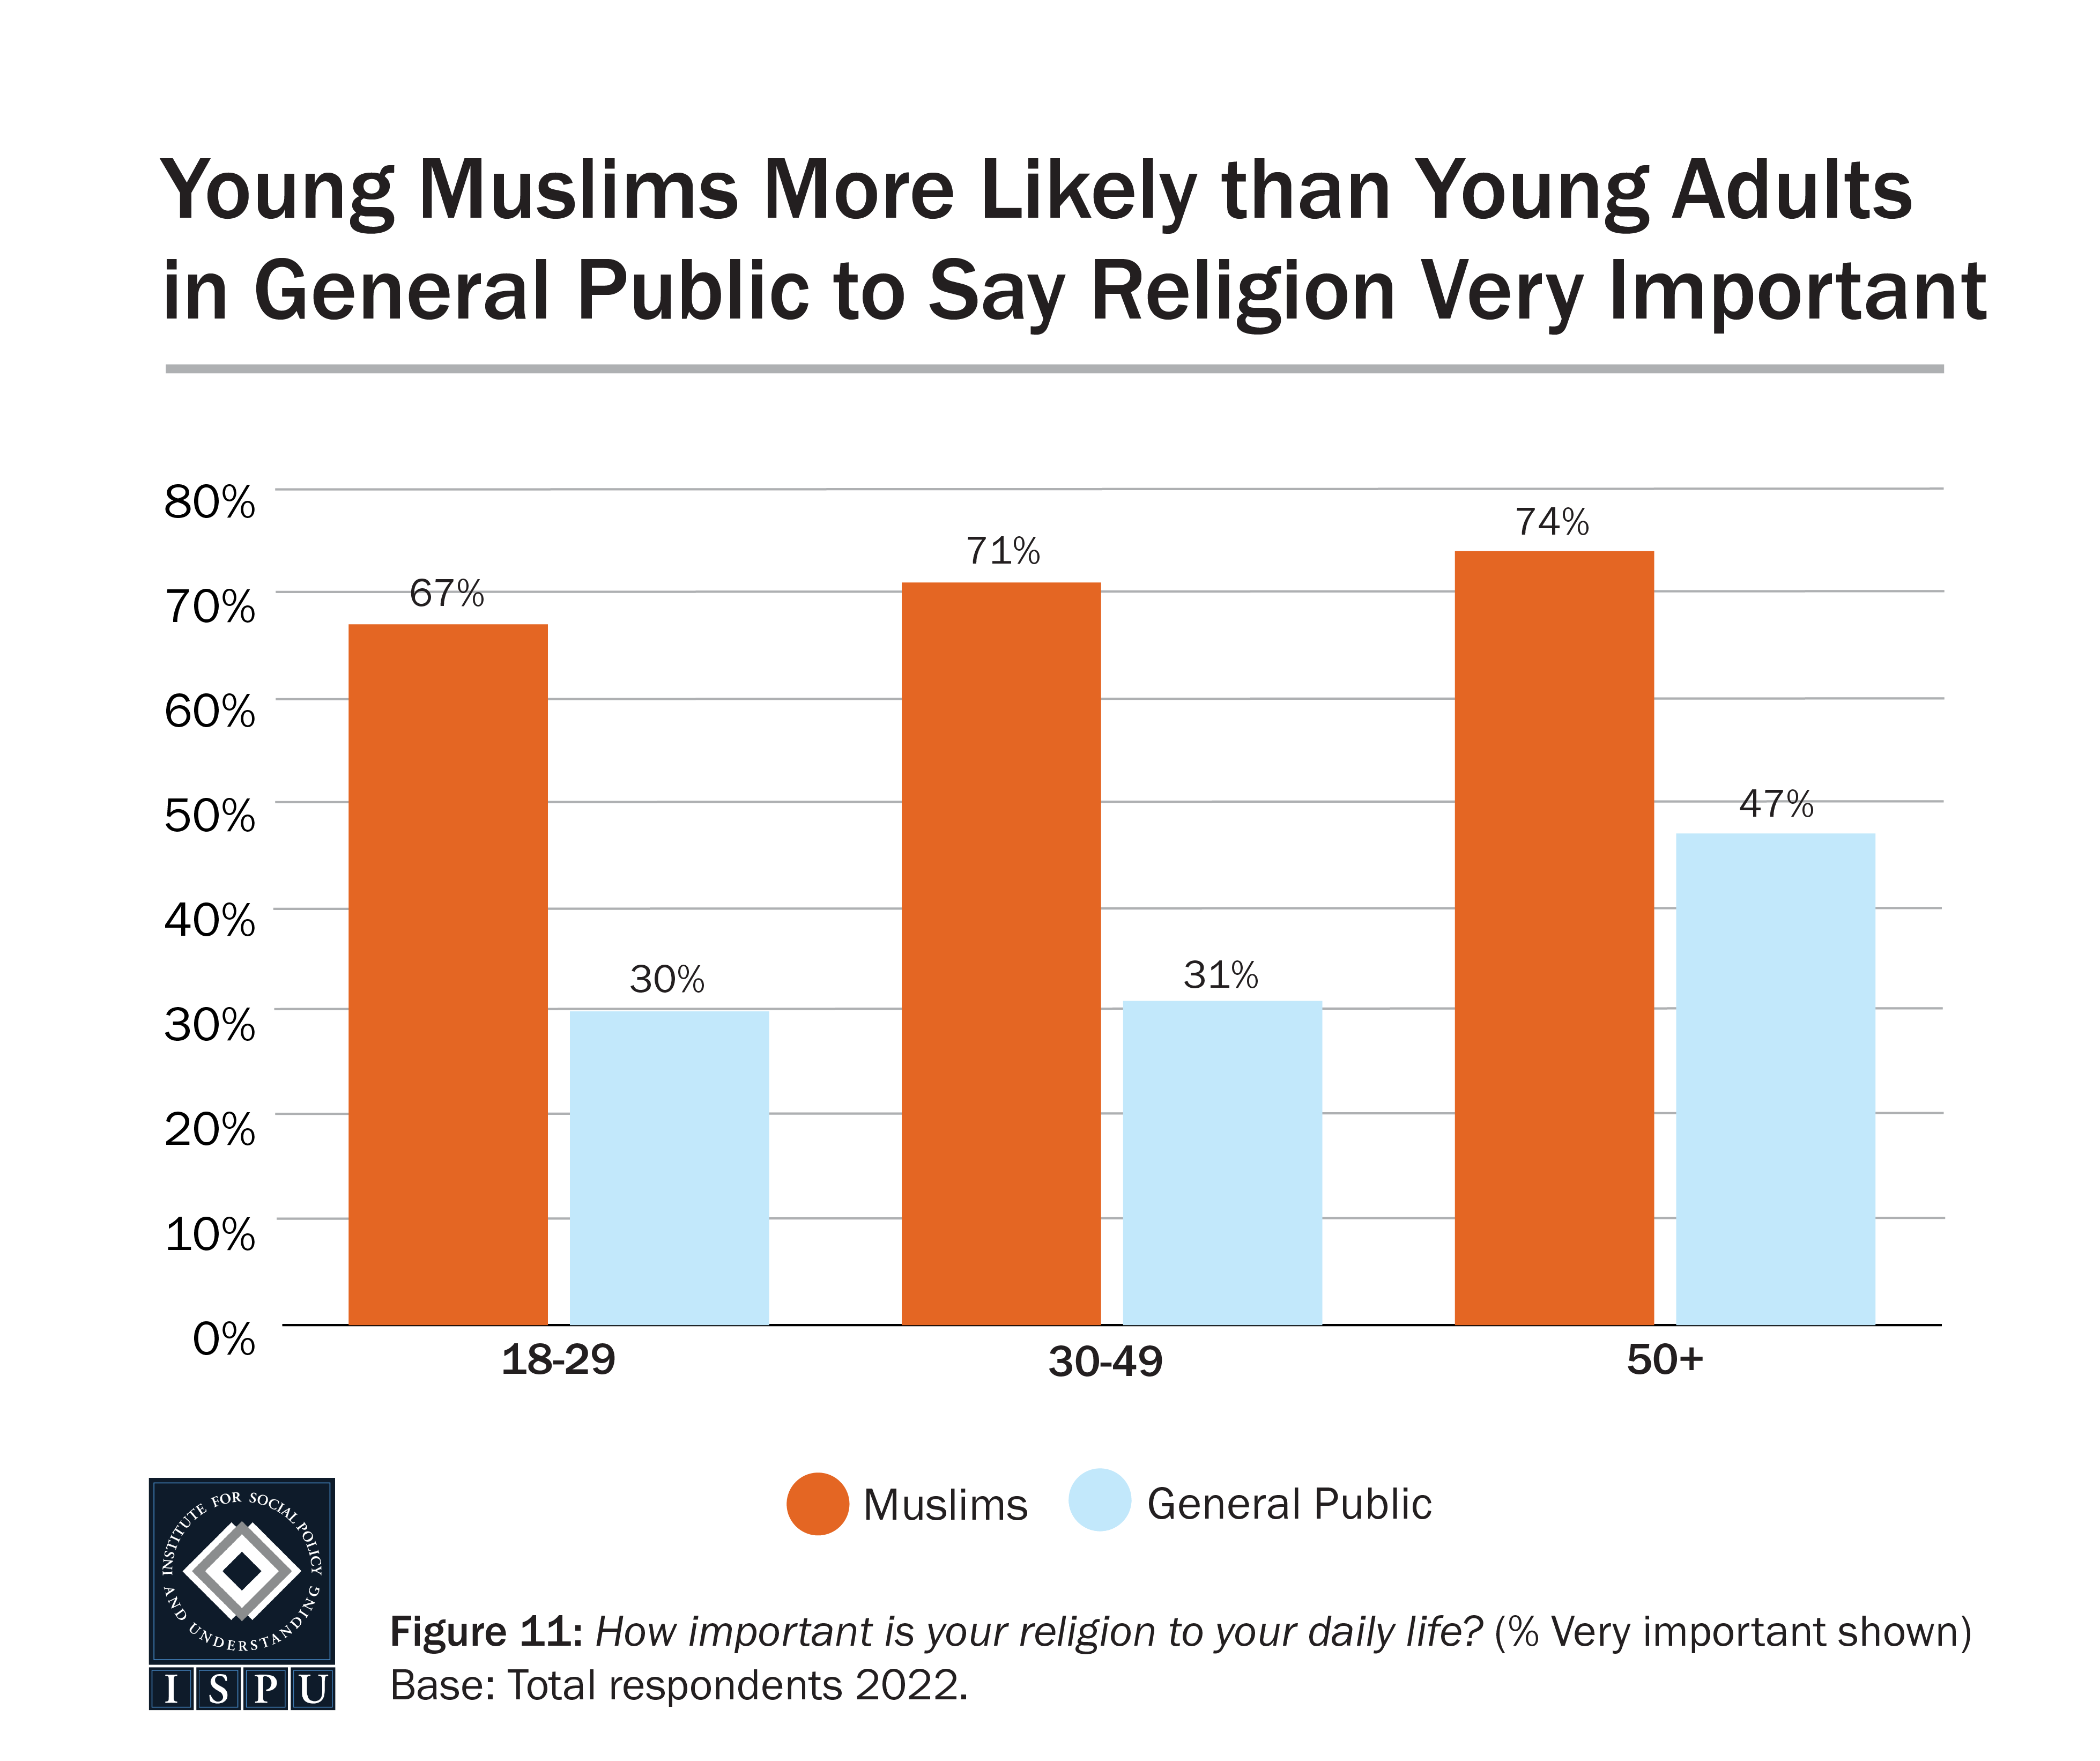 A bar graph showing the proportion of various age groups who say that religion is ‘very important’ to their daily life